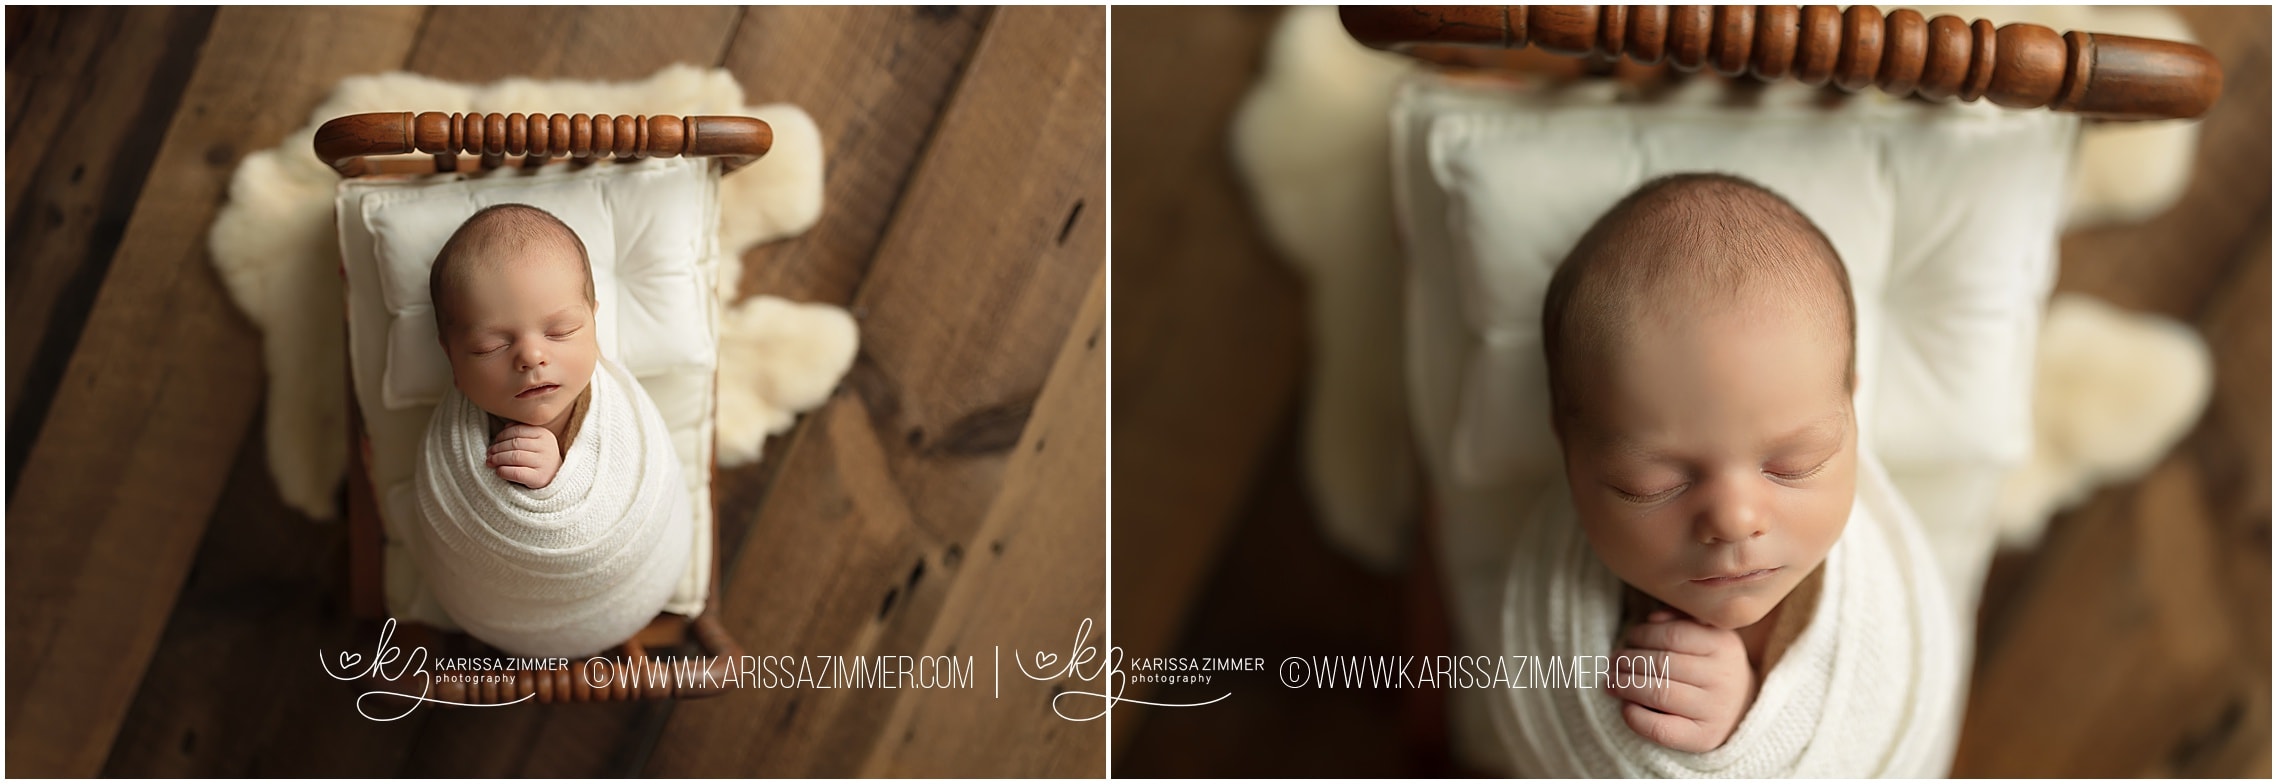 newborn posed on baby bed photography prop